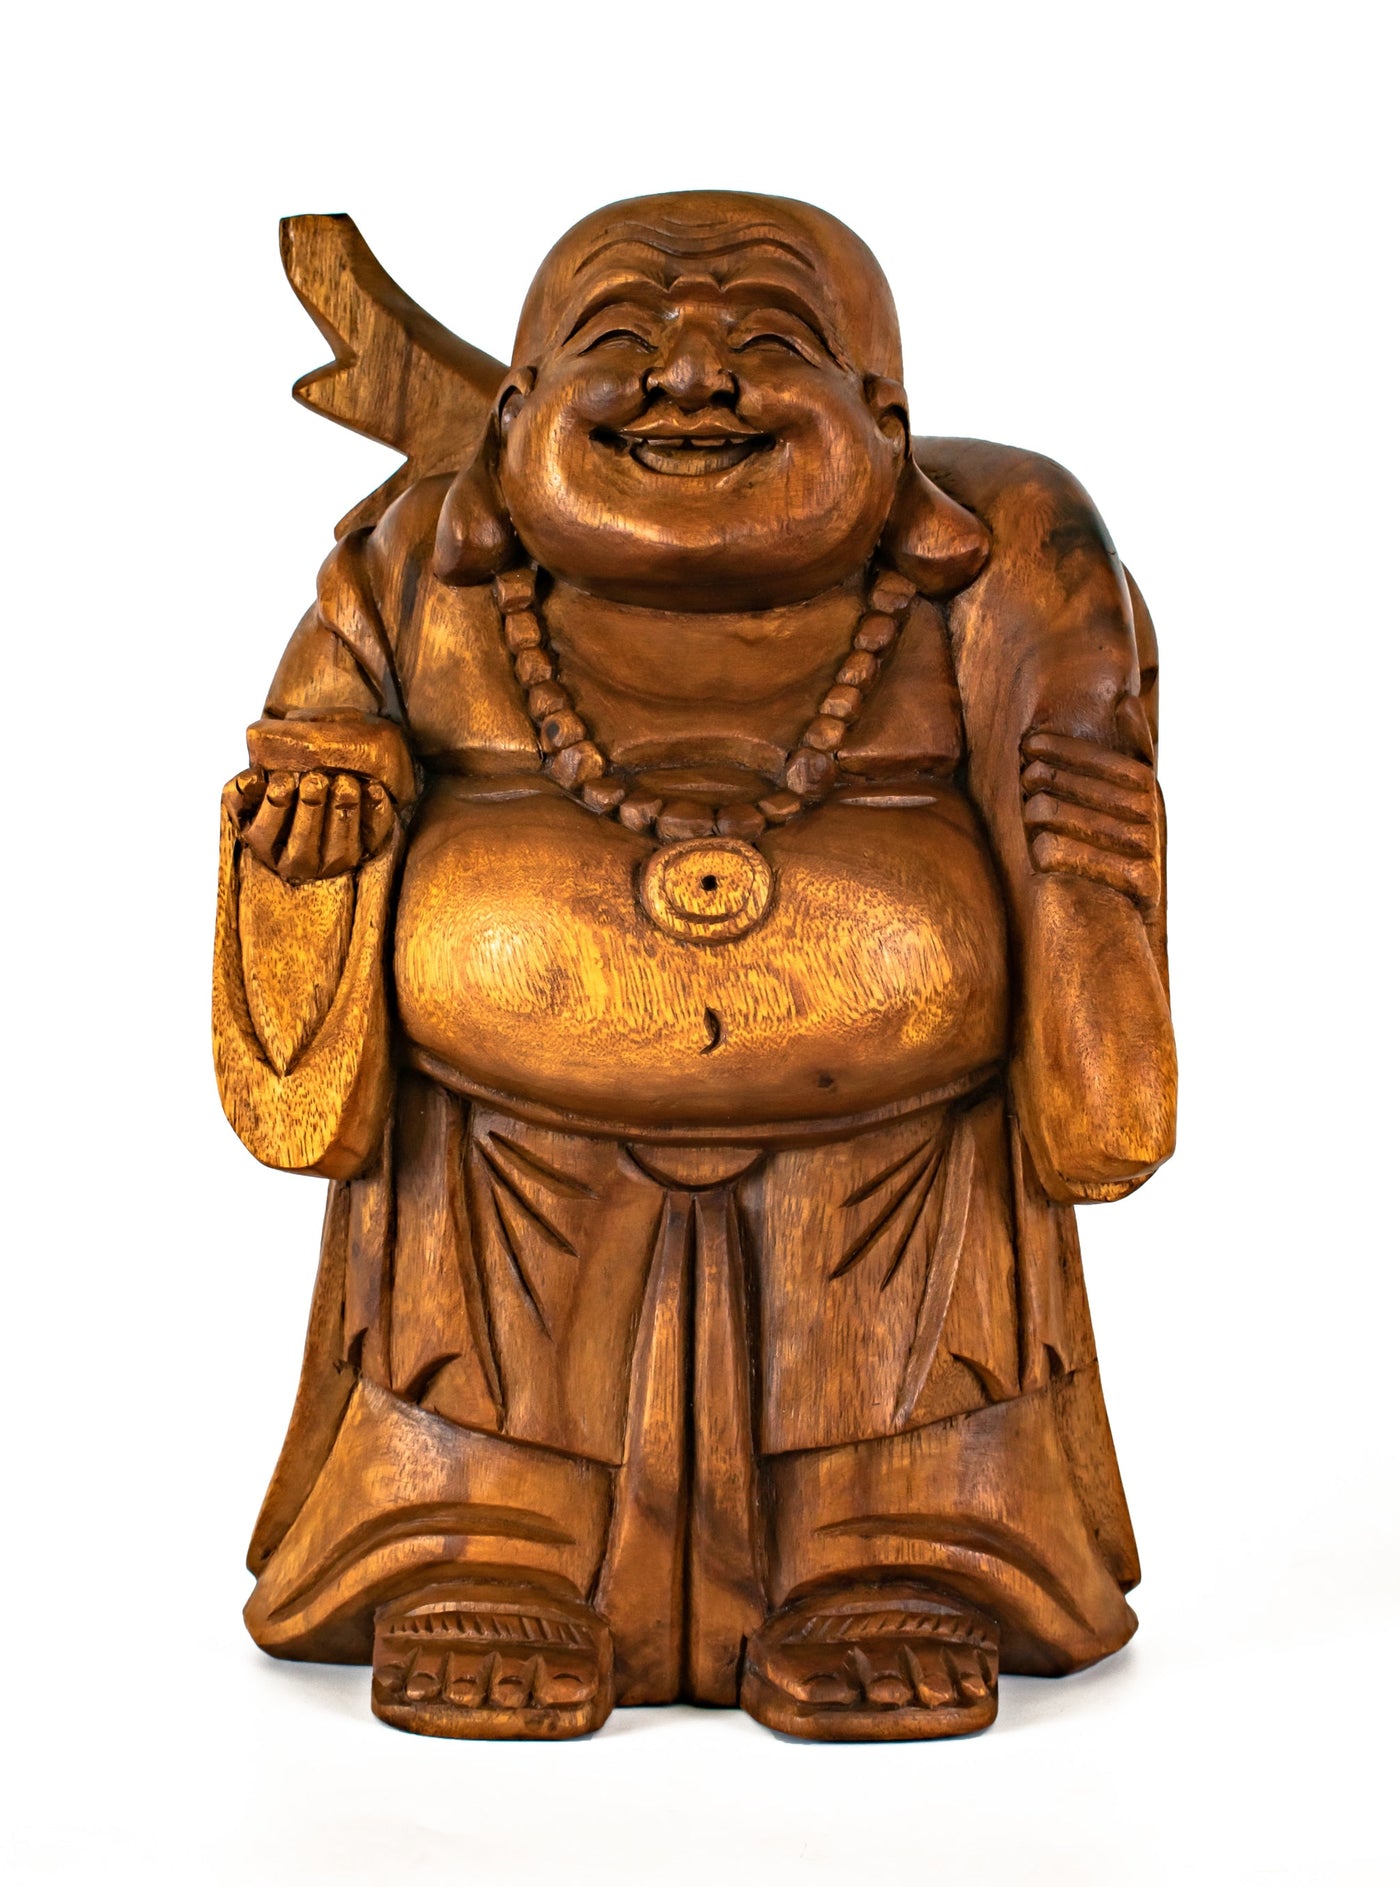 Wooden Traveling Happy Buddha Statue Hand Carved Smiling Sculpture Handmade Figurine Decorative Home Decor Wood Accent Handcrafted Art Decoration